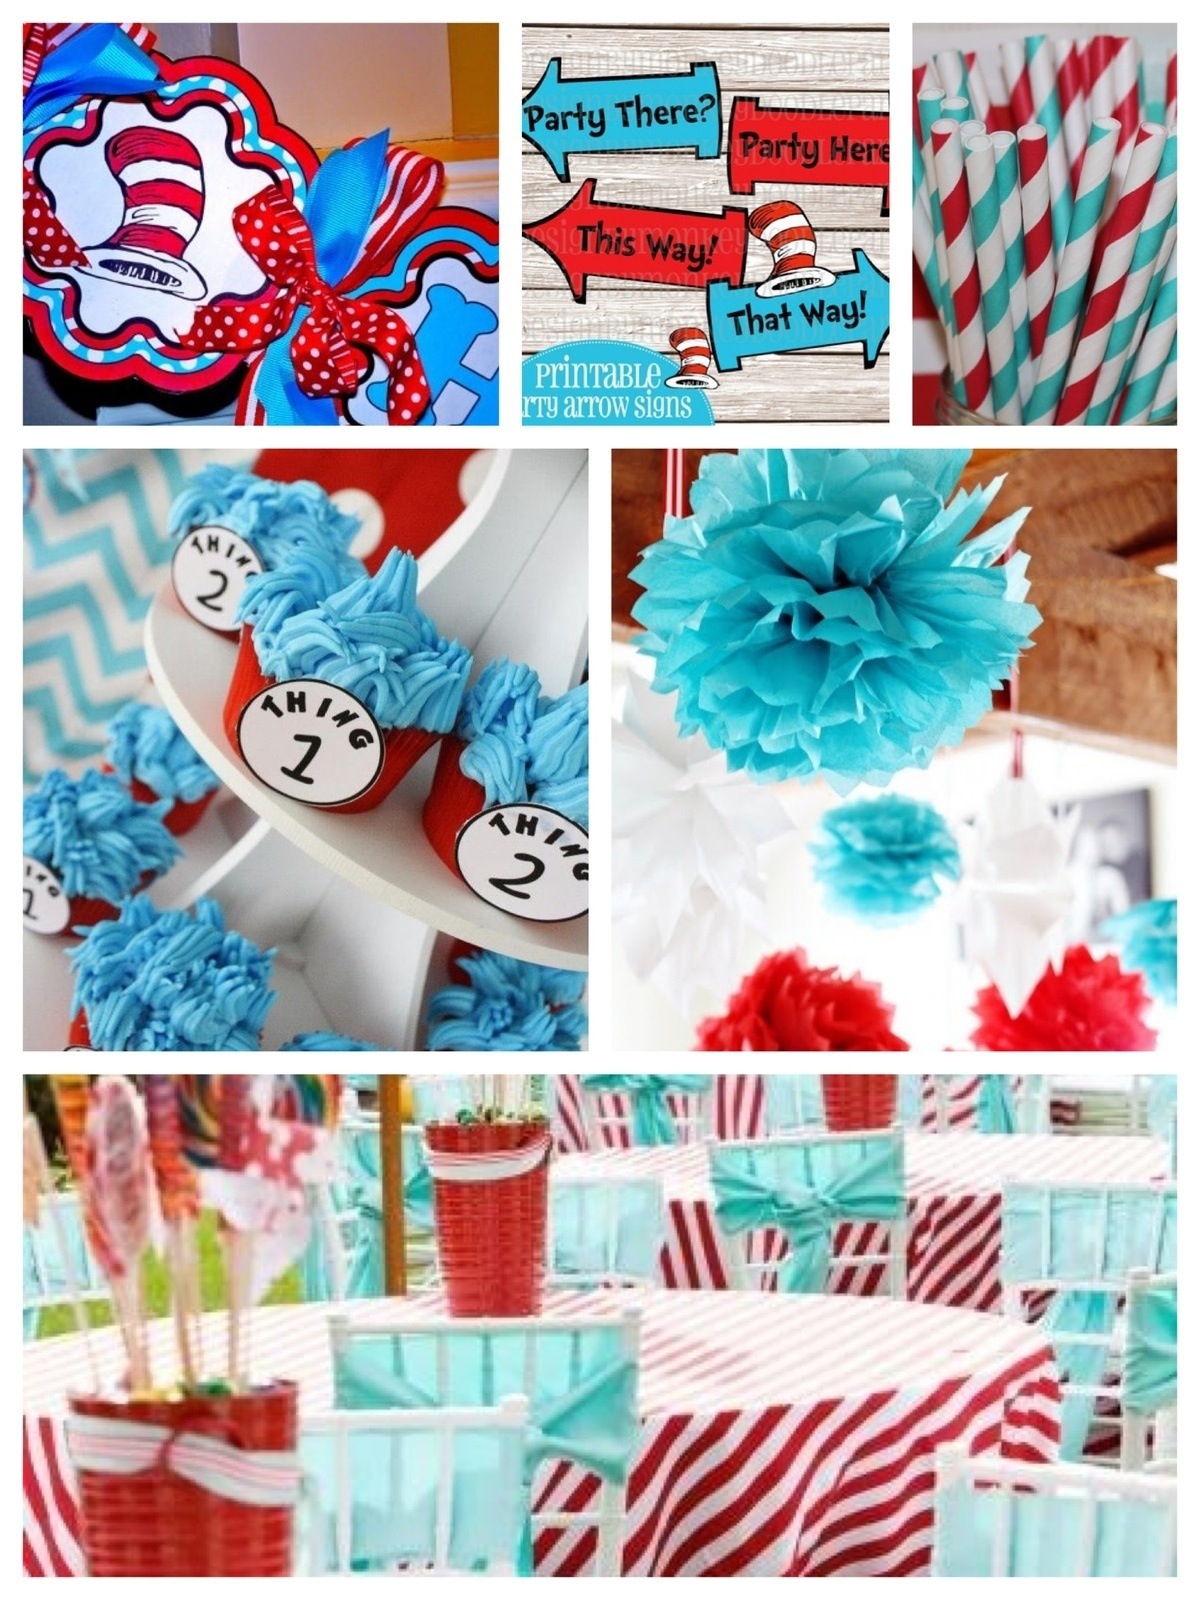 Dr. Seuss characters and Theme Party Ideas & Inspiration www.frostedevents.com Kids Birthday Party Ideas